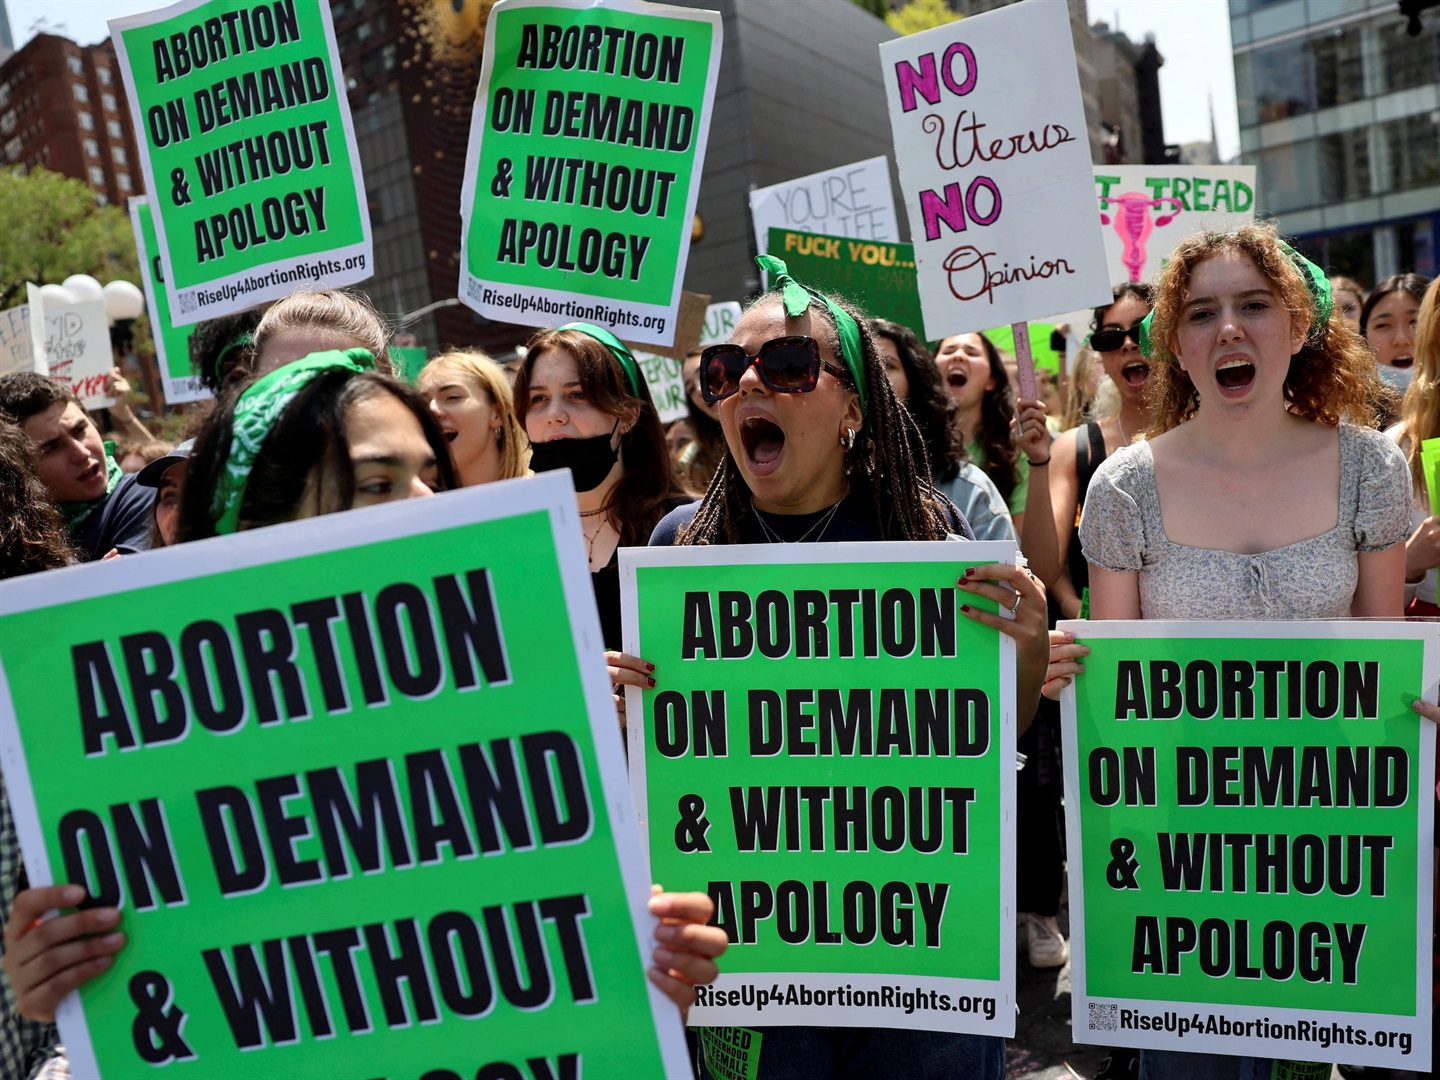 People protest in favour of abortion rights in Union Square, New York City. REUTERS/Mike Segar/File Photo